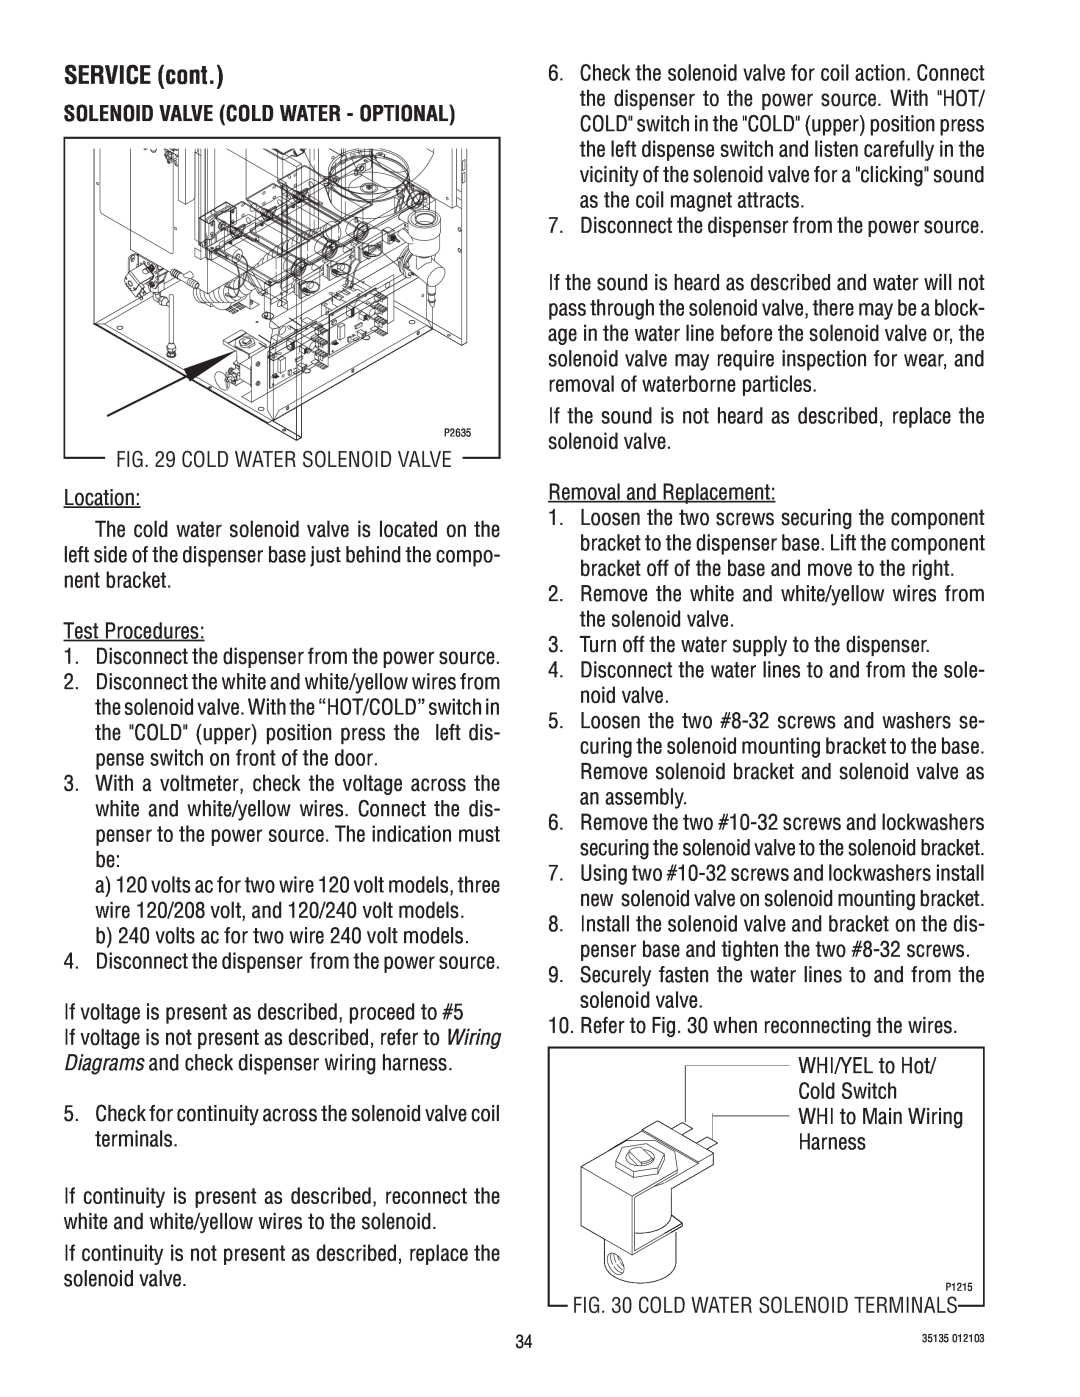 Bunn FMD-5, FMD-4 service manual Solenoid Valve Cold Water - Optional, SERVICE cont 